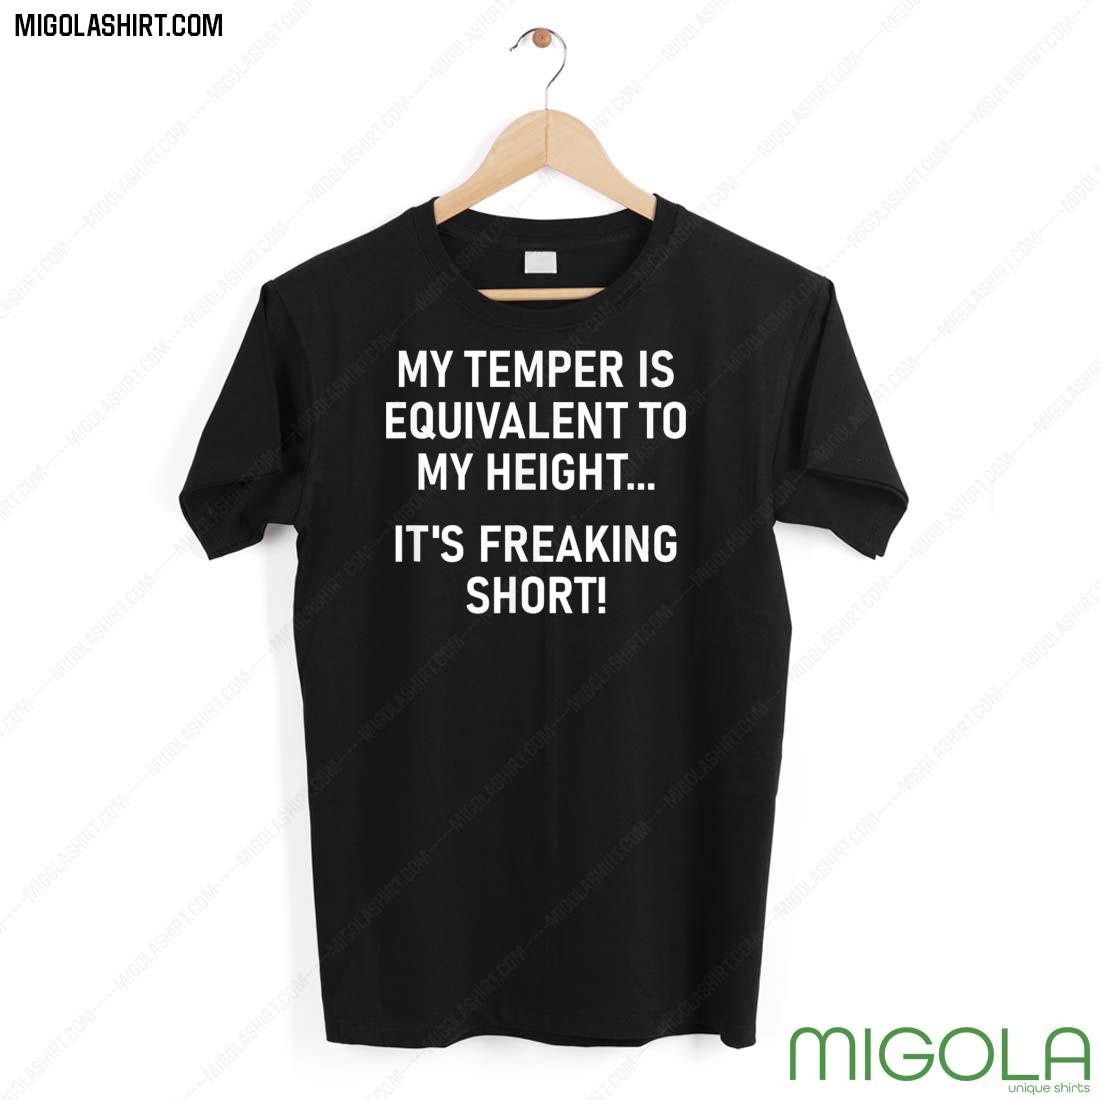 My Temper Is Equivalent To My Height Shirt